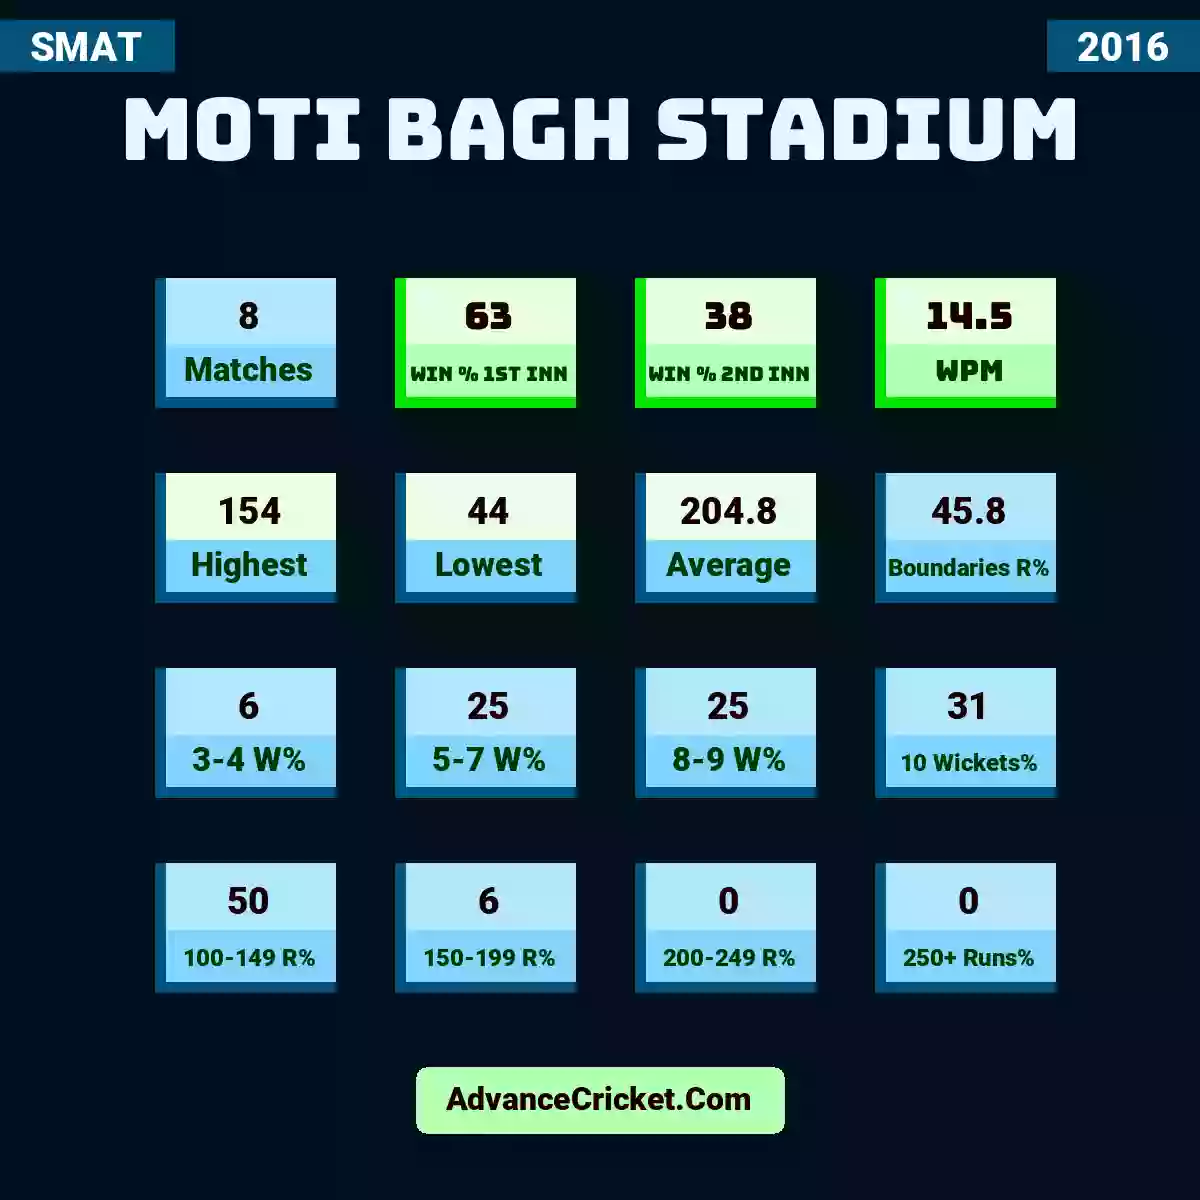 Image showing Moti Bagh Stadium with Matches: 8, Win % 1st Inn: 63, Win % 2nd Inn: 38, WPM: 14.5, Highest: 154, Lowest: 44, Average: 204.8, Boundaries R%: 45.8, 3-4 W%: 6, 5-7 W%: 25, 8-9 W%: 25, 10 Wickets%: 31, 100-149 R%: 50, 150-199 R%: 6, 200-249 R%: 0, 250+ Runs%: 0.